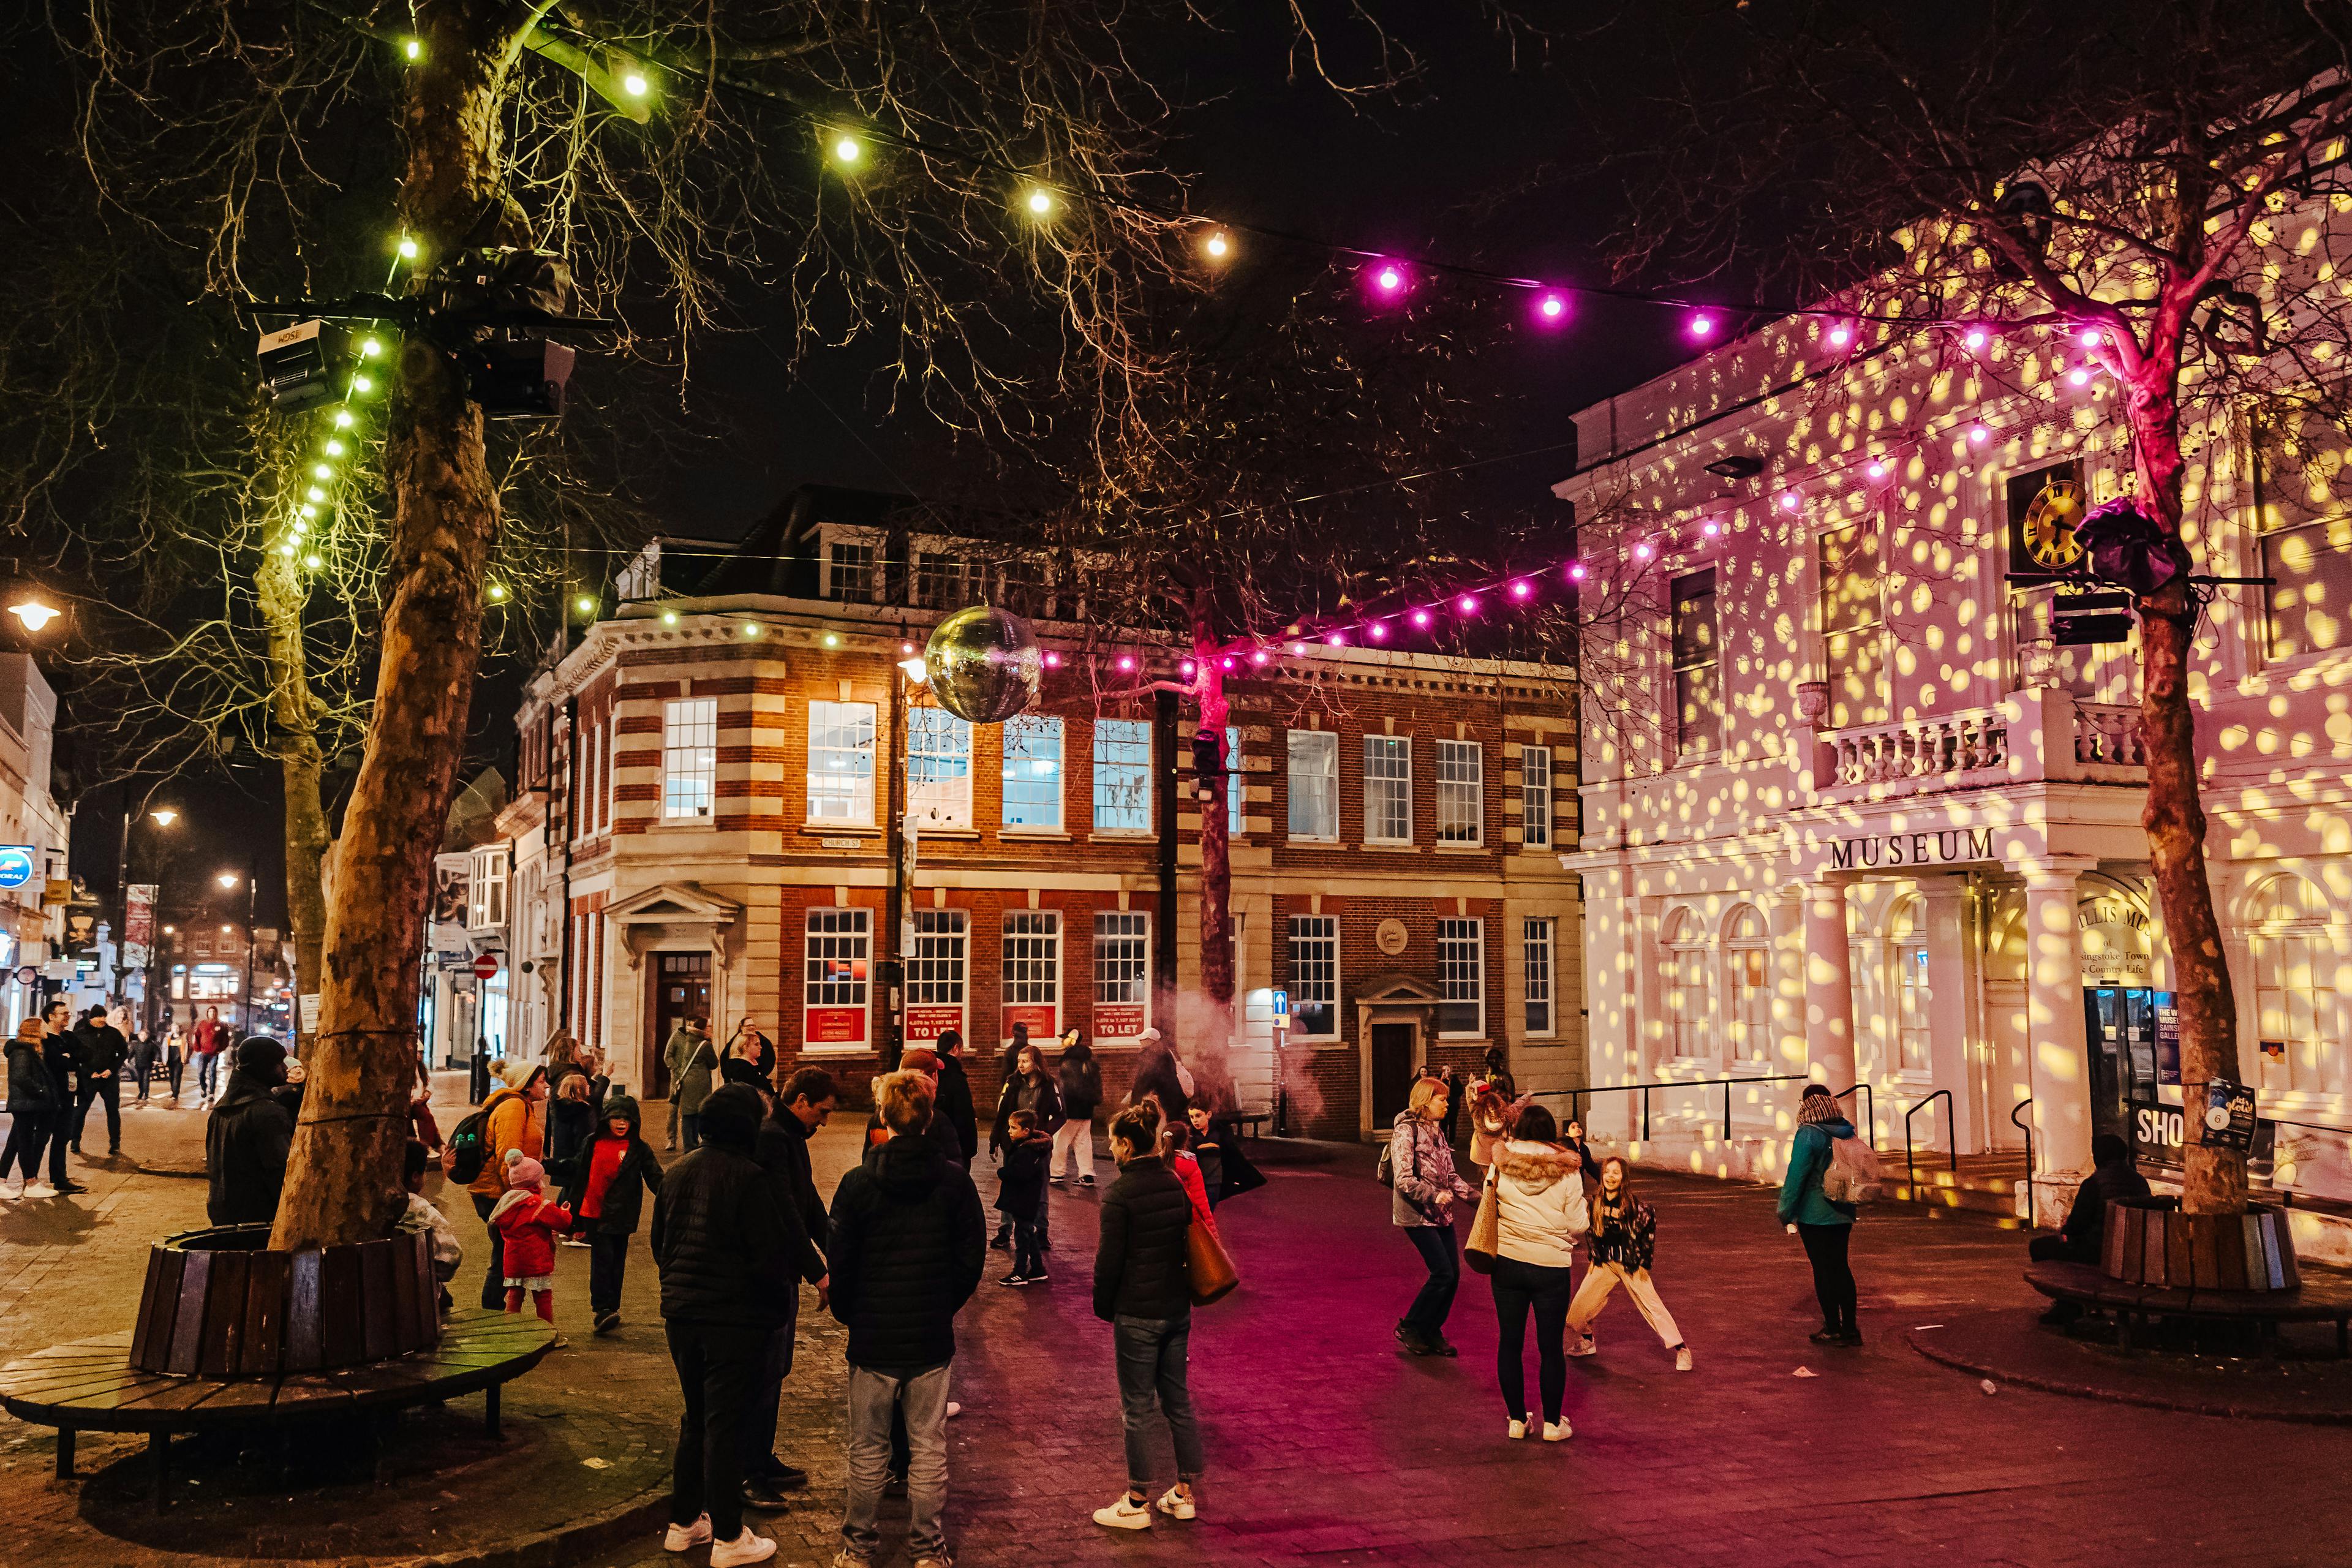 Image shows a crowd gathered outside in a square. There are white light projections on a building, festoon lights in yellow and pink with a glitter disco ball in the middle. The crowd watch the display.